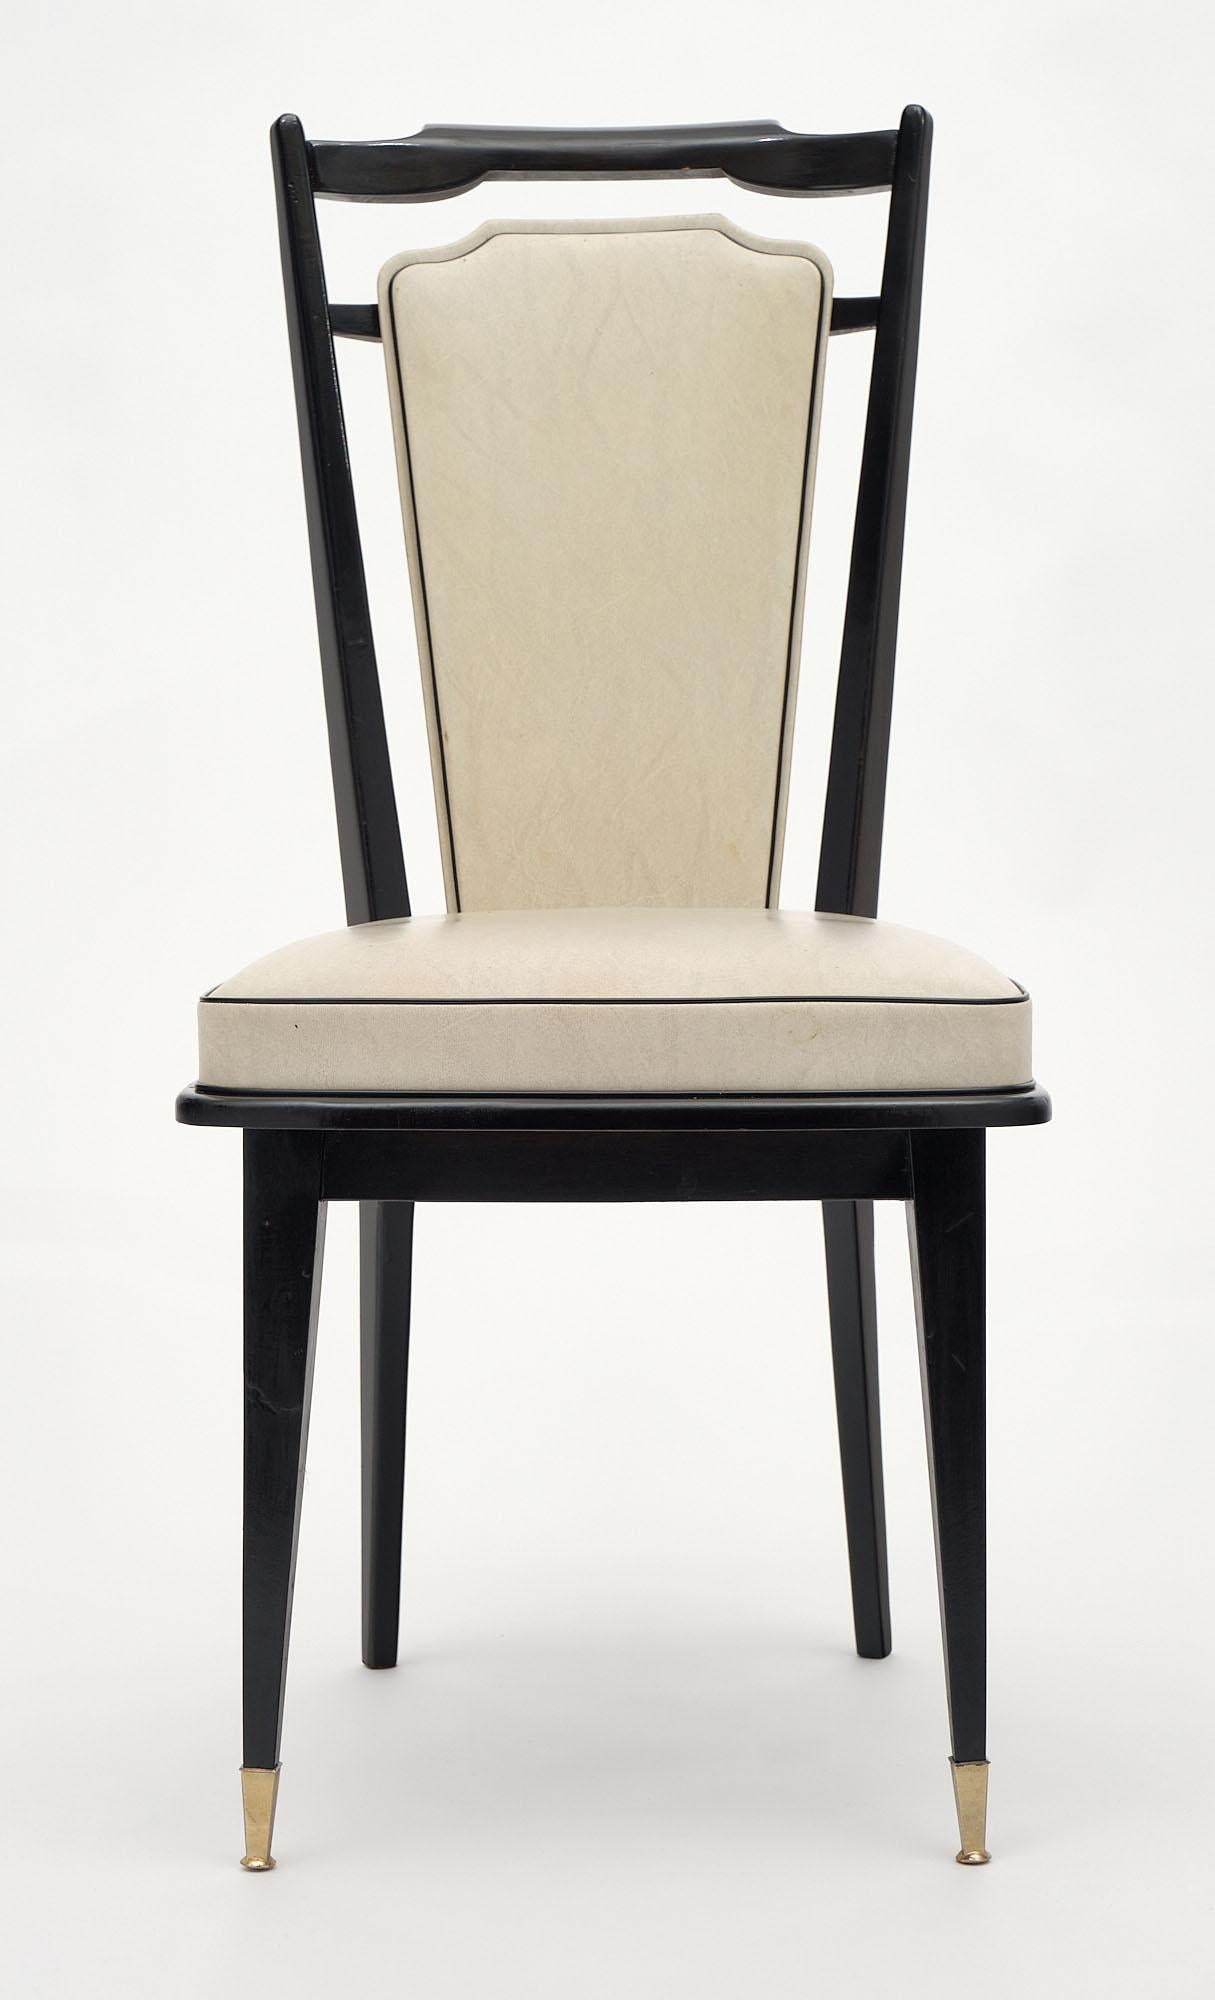 A set of eight chairs made of solid mahogany with legs capped with brass feet. The wood has been ebonized and finished with a lustrous French polish. They feature their original ivory piped vinyl upholstery.